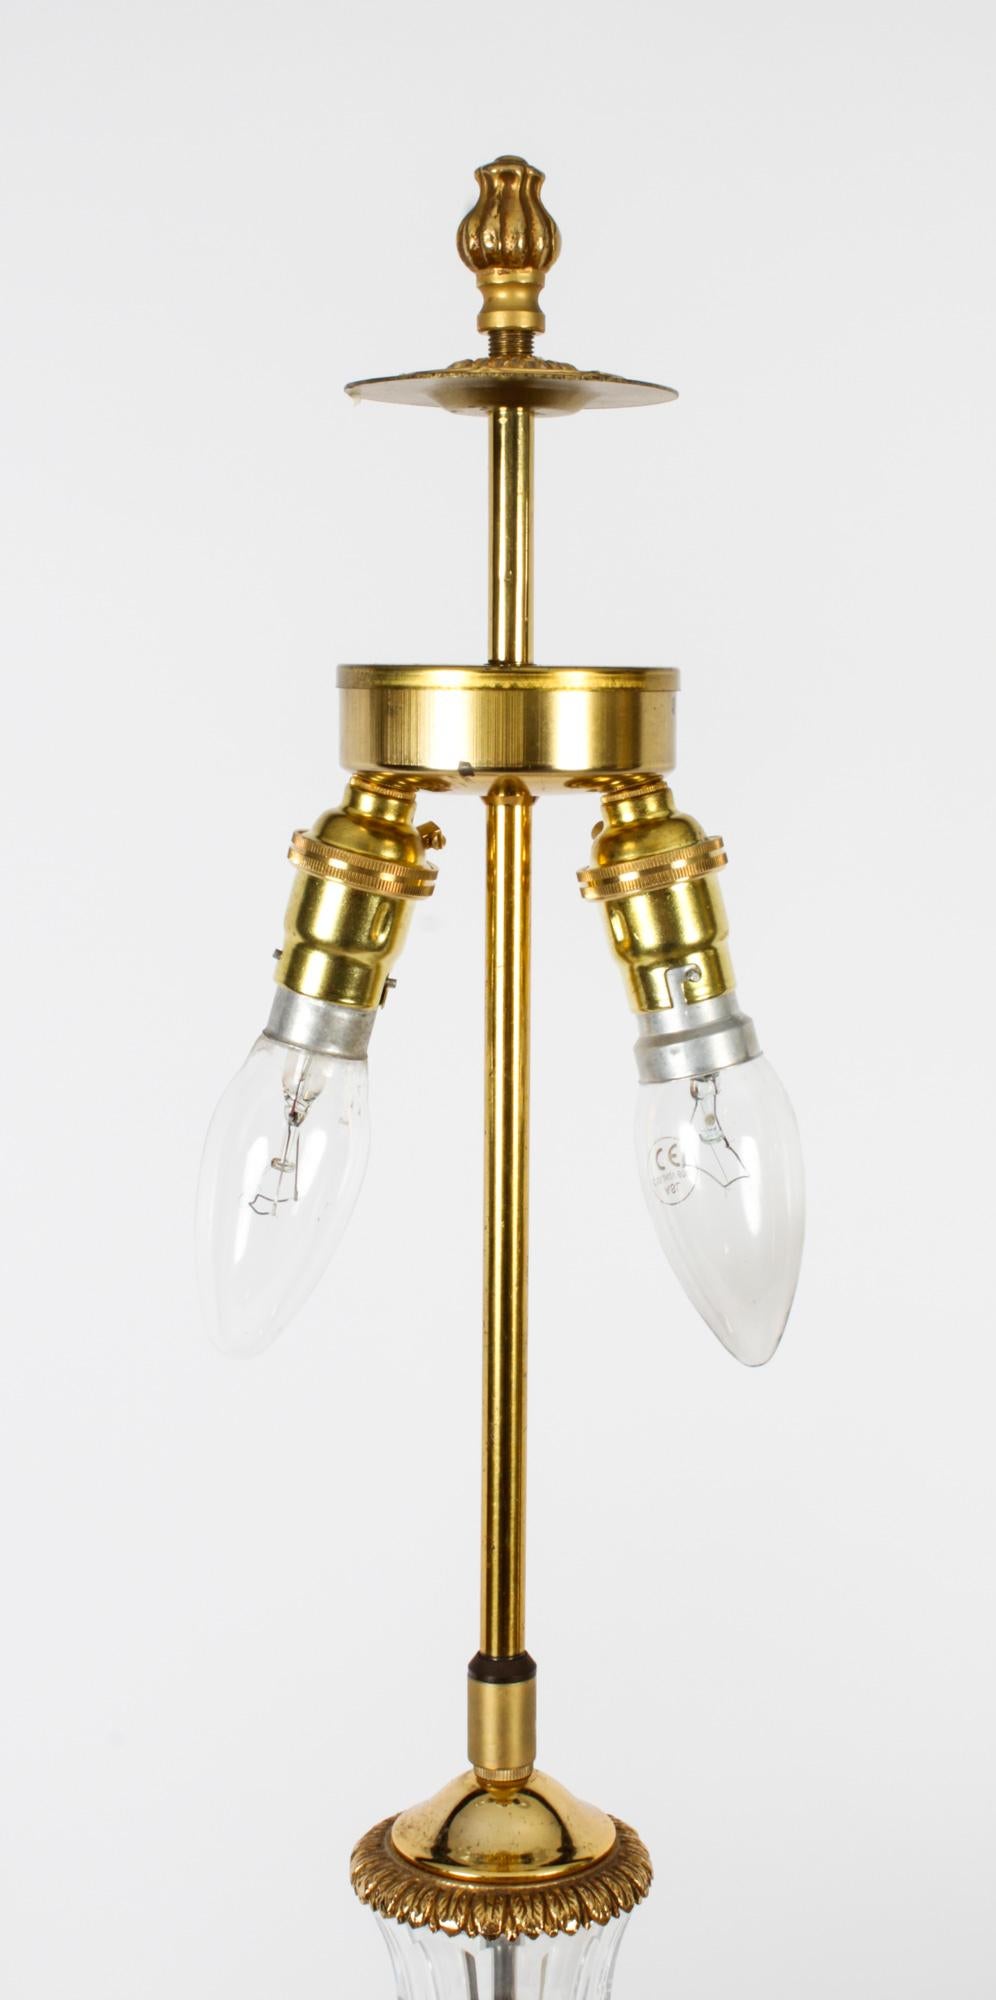 Mid-20th Century Antique Pair of French Ormolu & Glass Baccarat Table Lamps, Mid 20th C